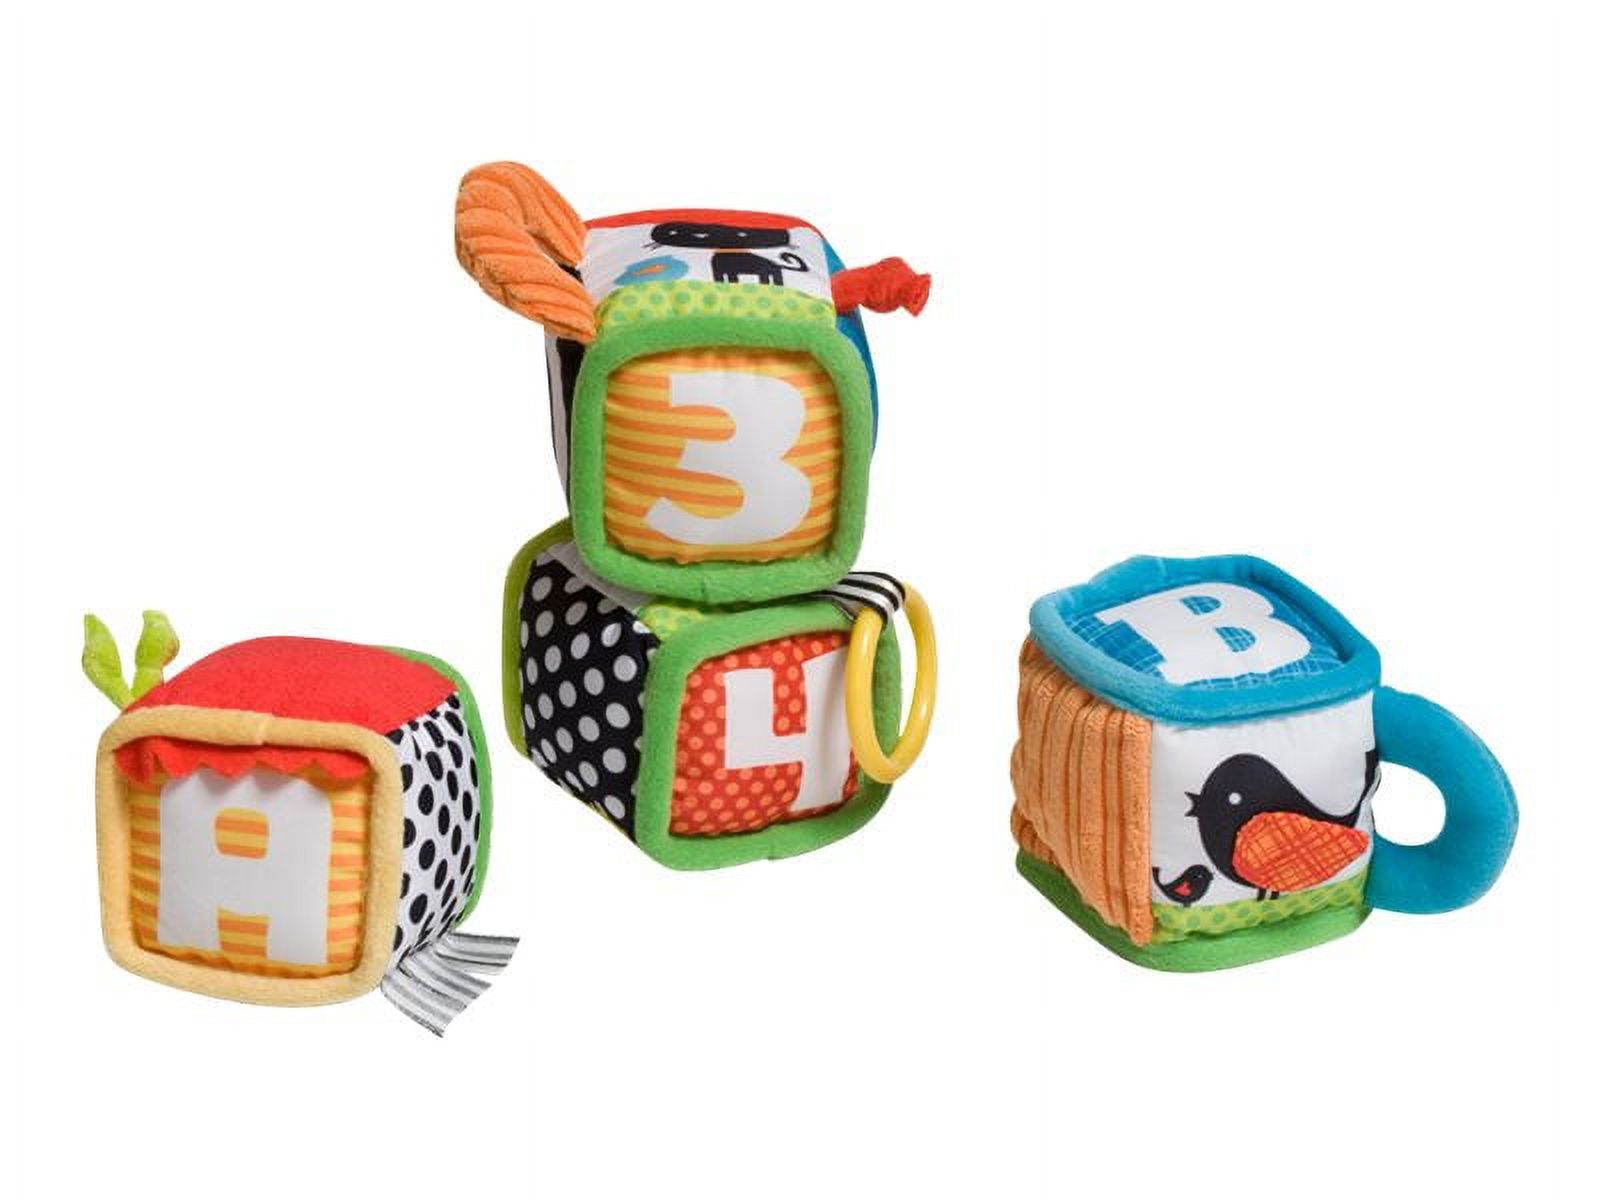 Infantino Discover and Play Soft Blocks Development Toy - image 1 of 3